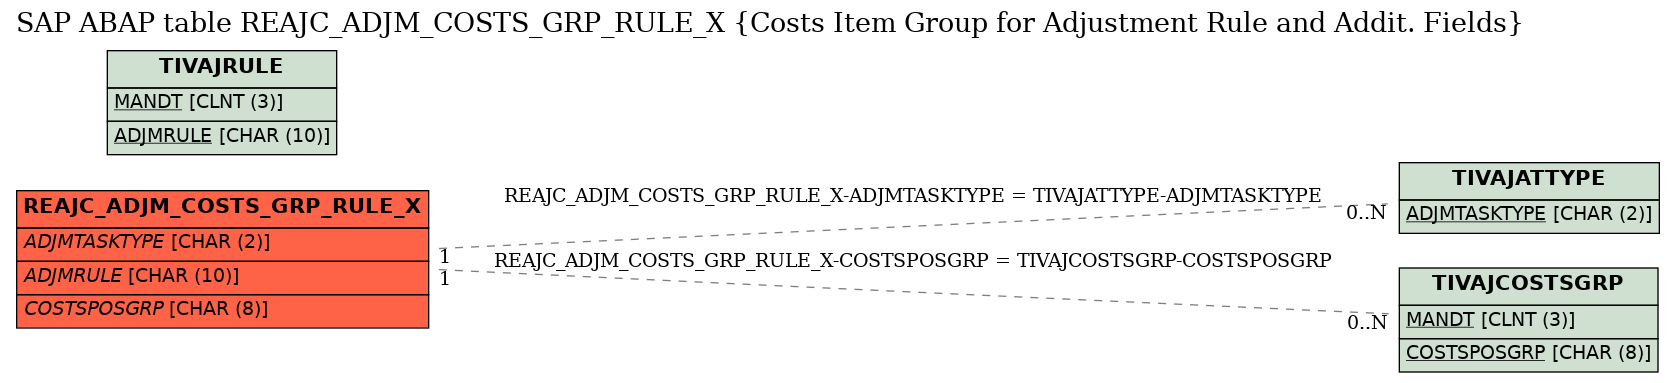 E-R Diagram for table REAJC_ADJM_COSTS_GRP_RULE_X (Costs Item Group for Adjustment Rule and Addit. Fields)